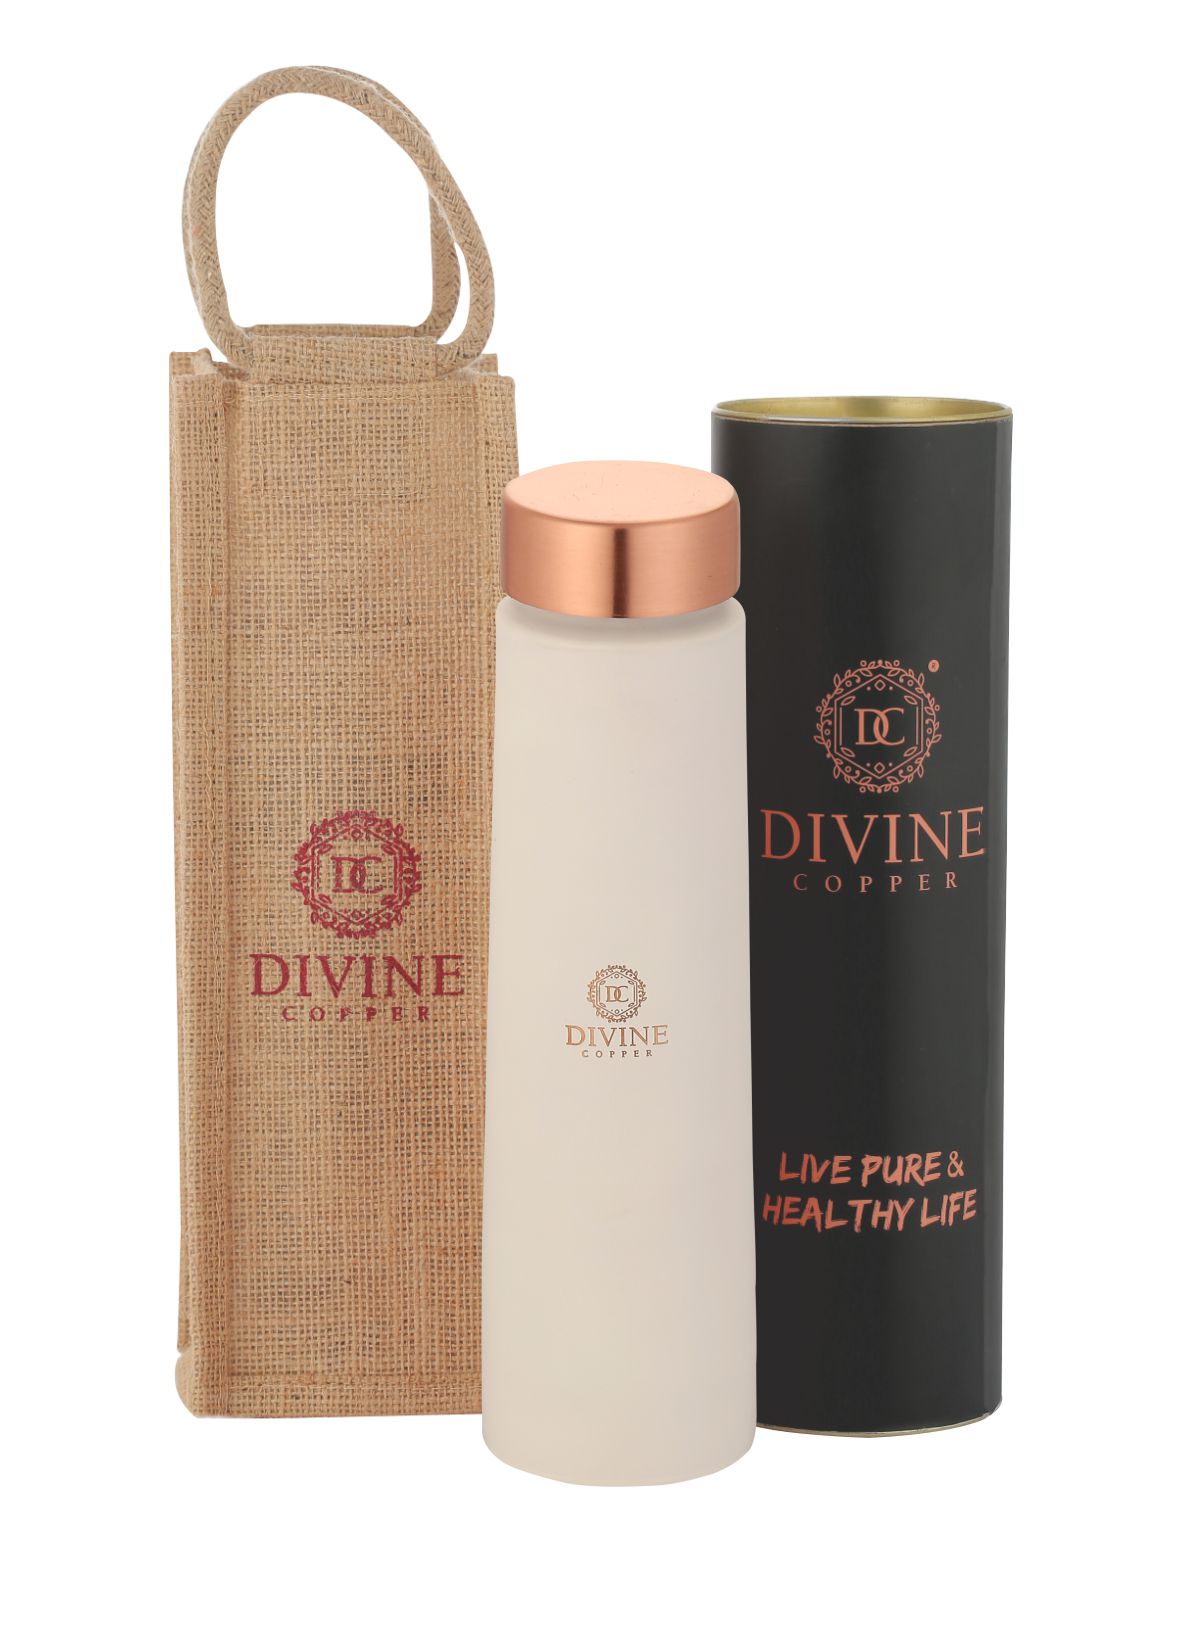 Eclair pearl 900ml Pure copper bottle with Free Jute carry bag